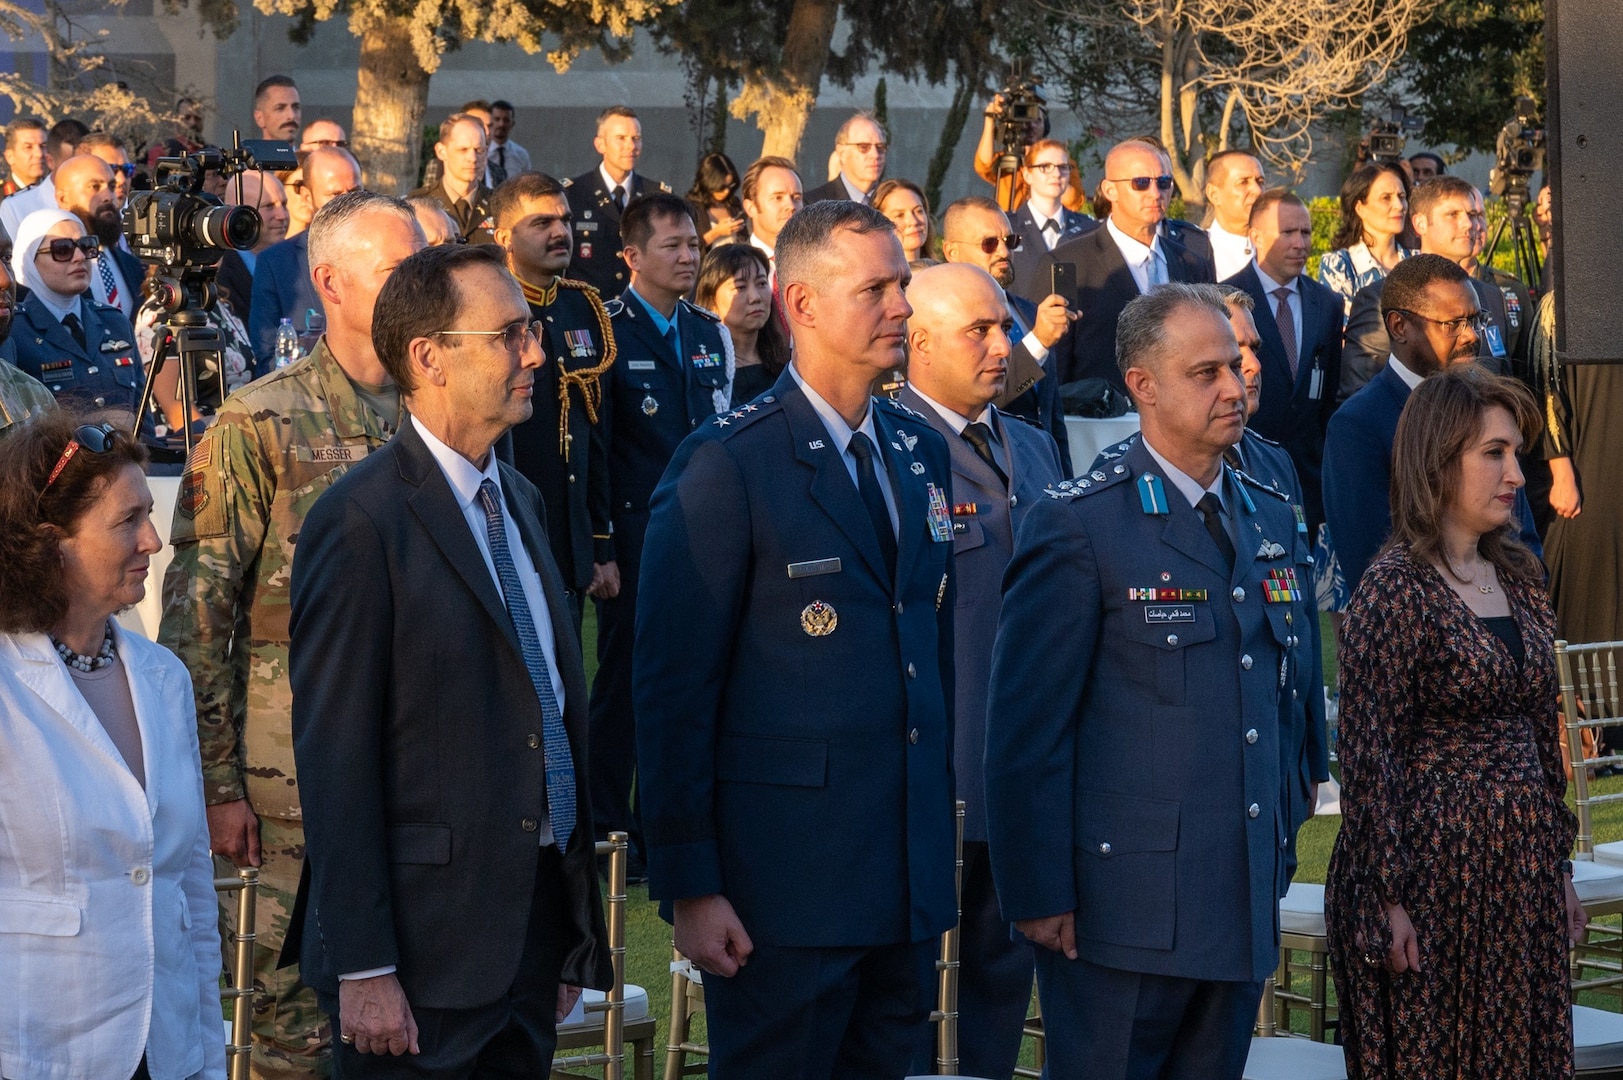 U.S. Air Force Lt. Gen. Alexus G. Grynkewich, Ninth Air Force (Air Forces Central) commander, stands for the U.S. National Anthem with leaders and representatives at the USAF 75th anniversary celebration at the U.S. Embassy in Amman, Jordan, Aug. 25, 2022.